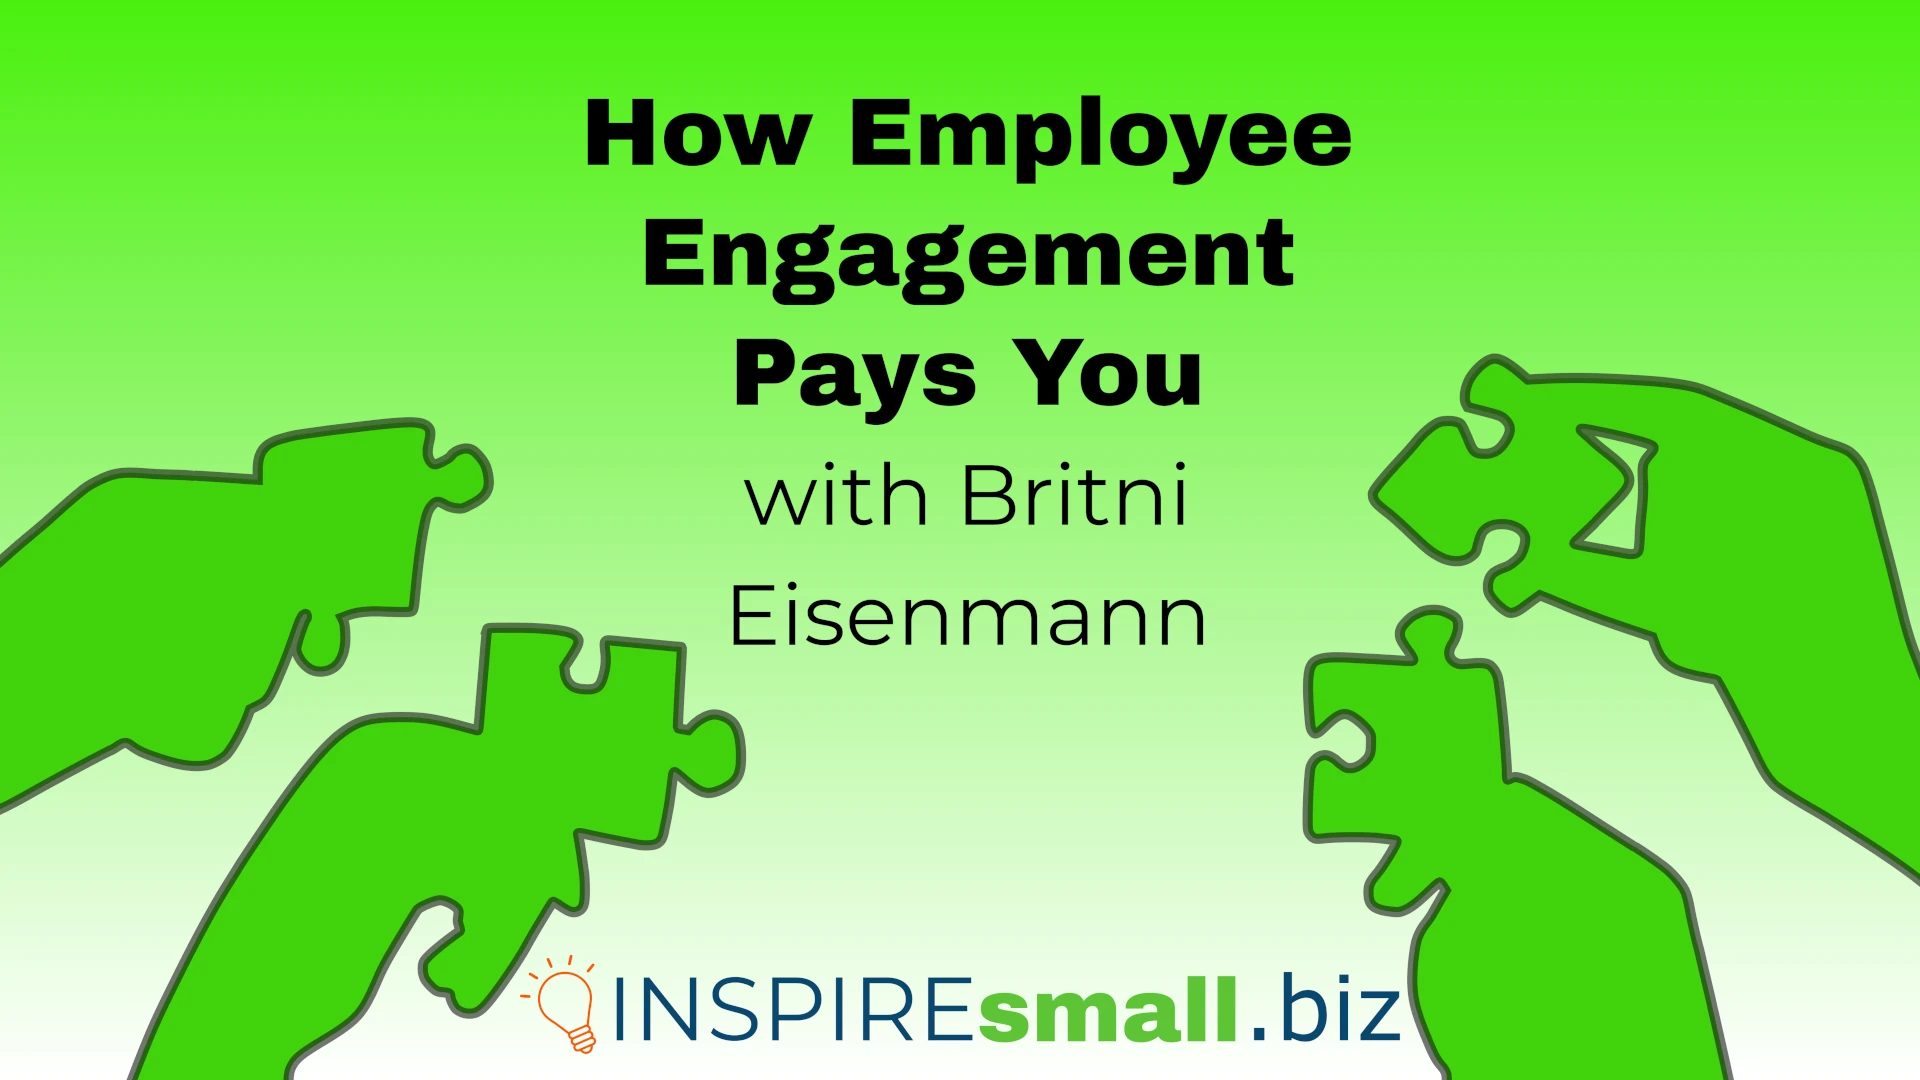 How Employee Engagement Pays You, with speaker Britni Eisenmann, hosted by INSPIREsmall.biz for Monday Networking on Zoom. The image has four hands holding puzzle pieces silhouetted in green against a green and white background.